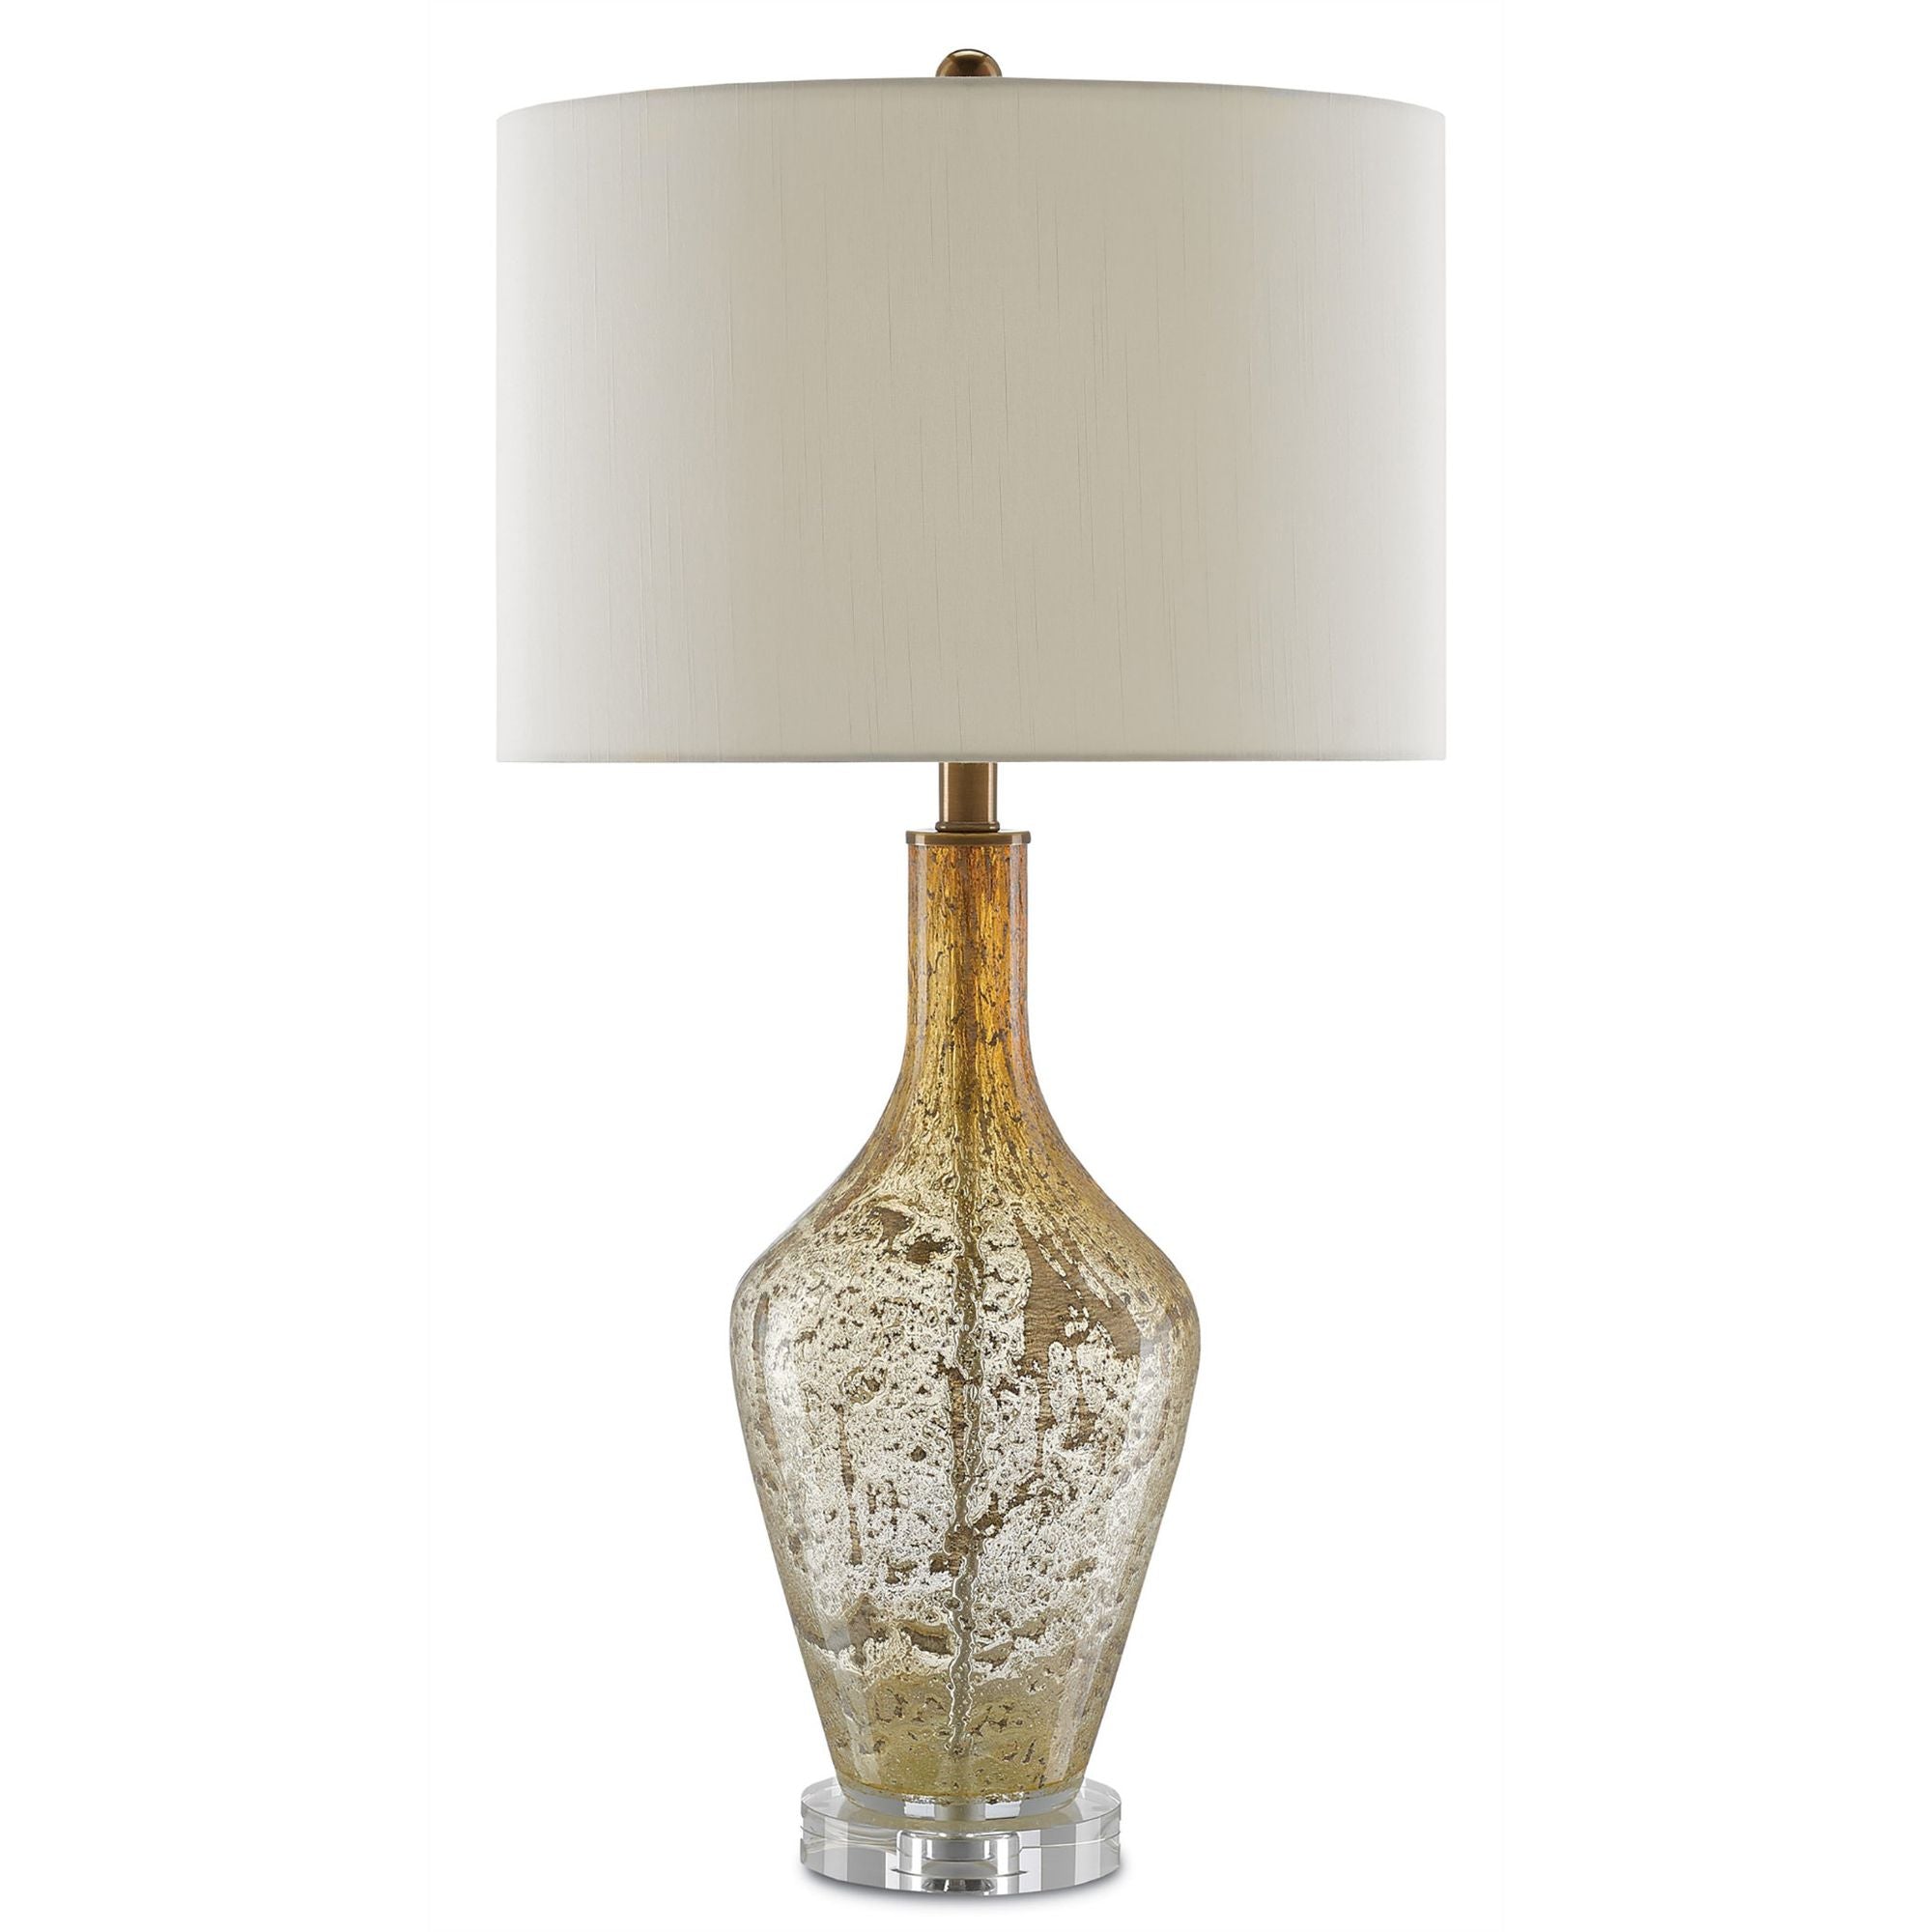 Habib Table Lamp - Champagne Speckle